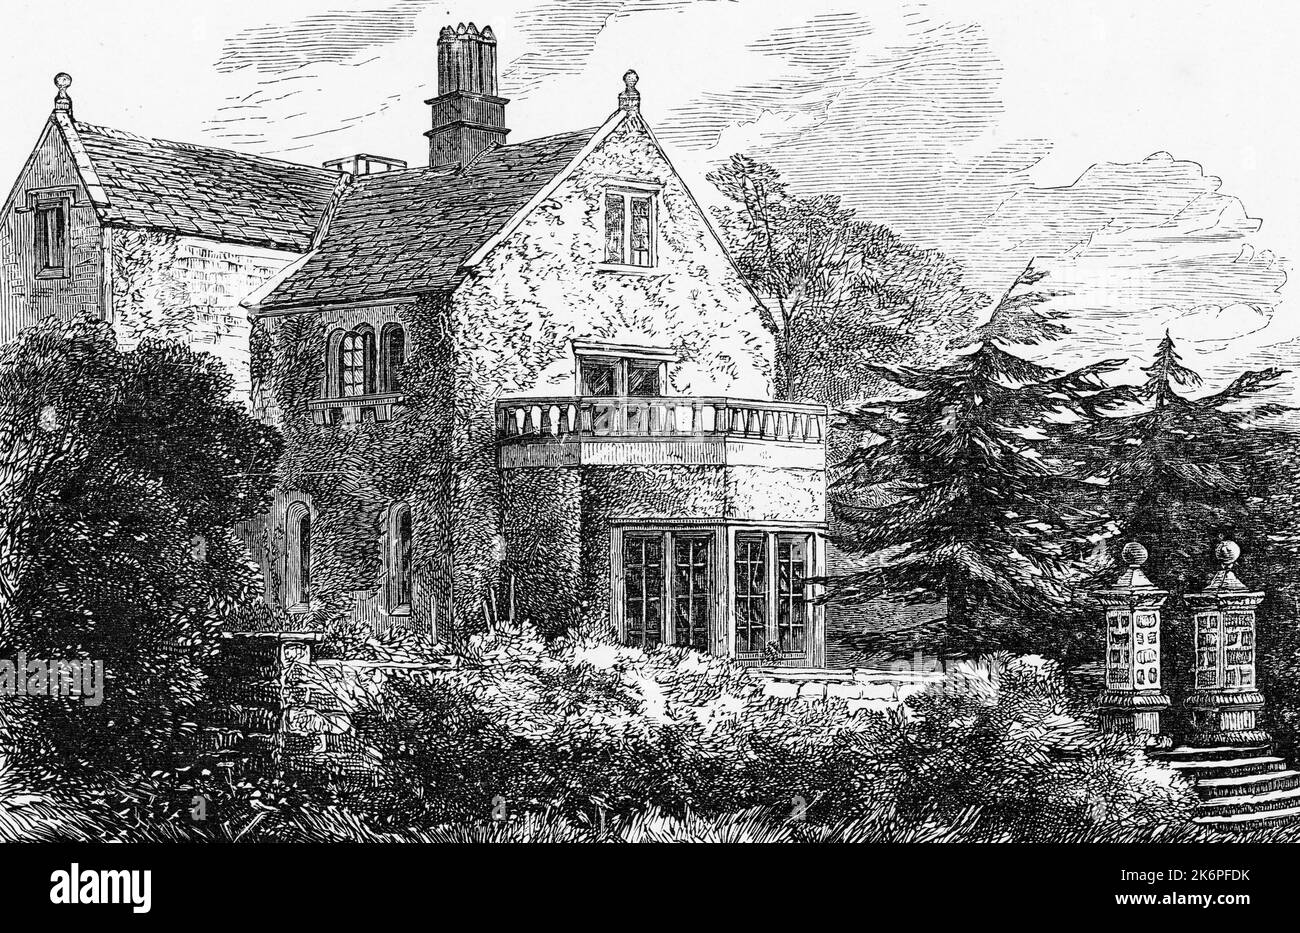 Lea Hurst, Derbyshire, c1911. The Family home of Florence Nightingale (1820-1910). Originally a 17th century farm house, Lea Hurst was developed into a country home by Florence Nightingale's father, William Nightingale, in 1820-21. Stock Photo